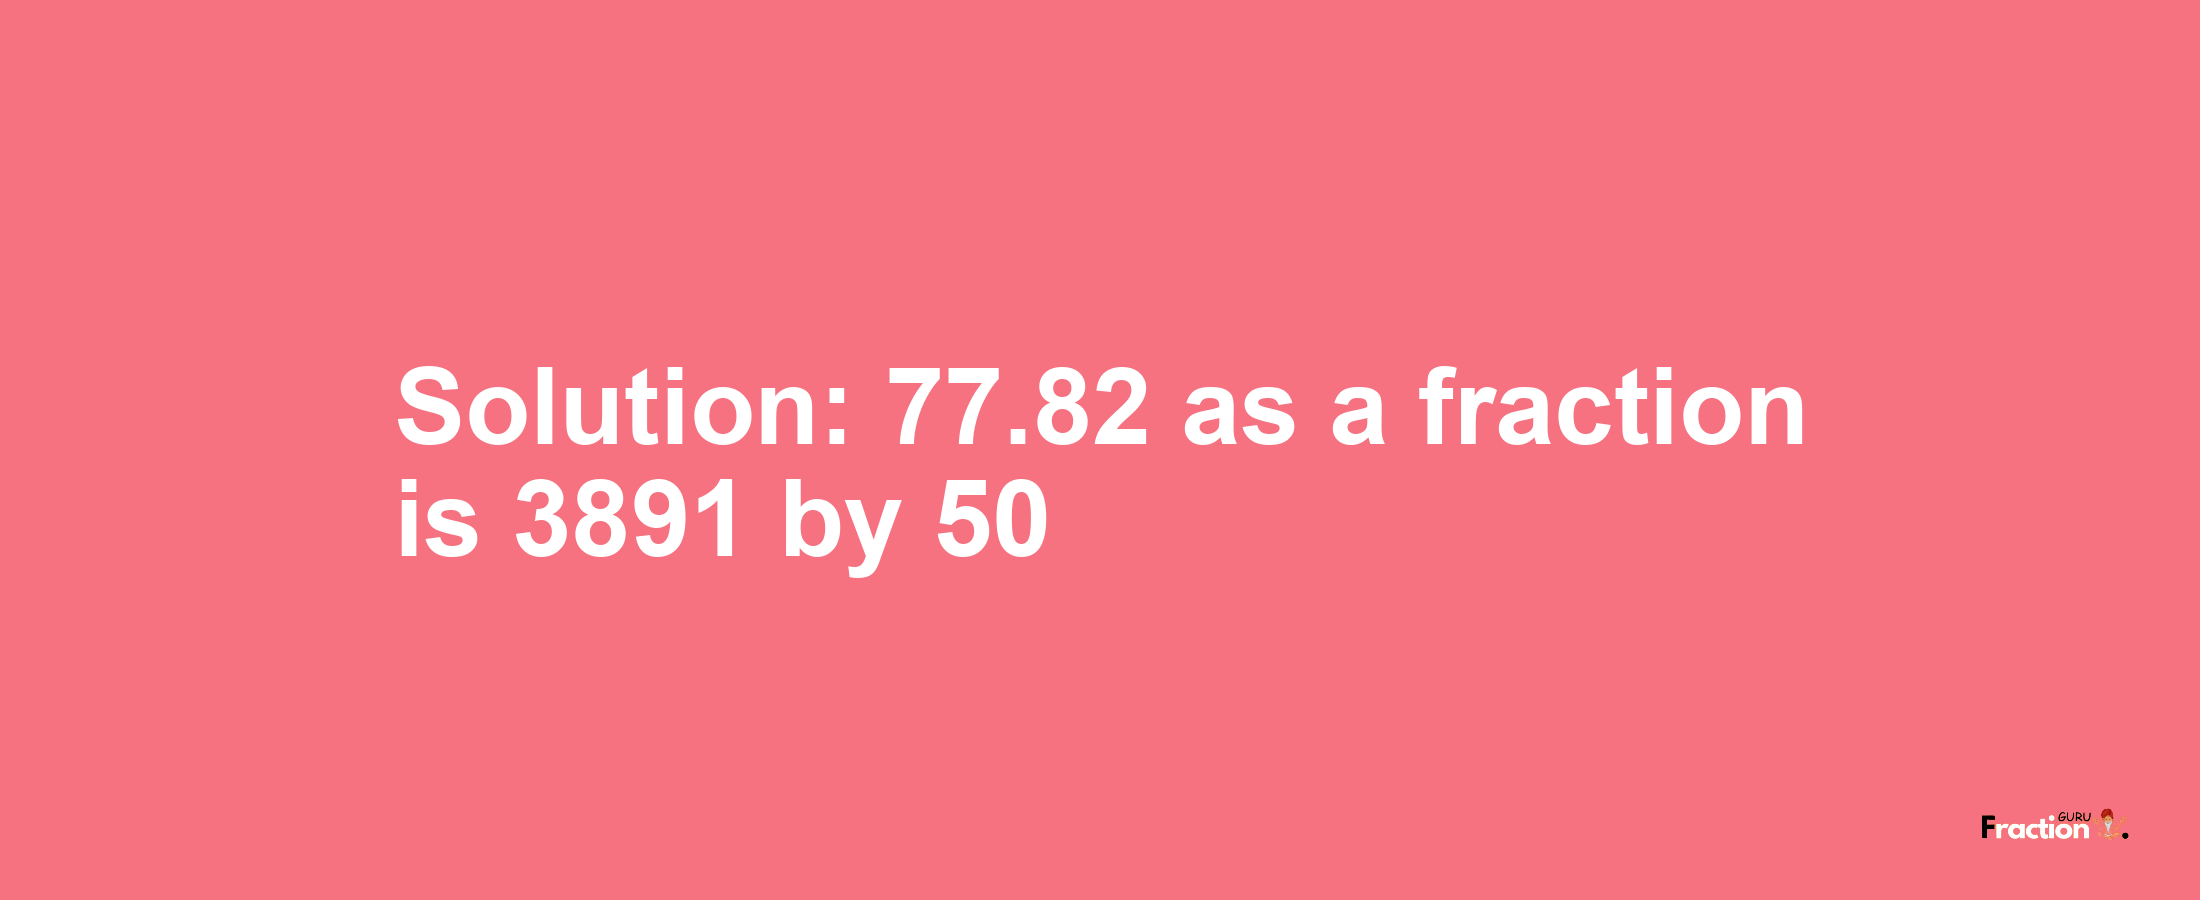 Solution:77.82 as a fraction is 3891/50